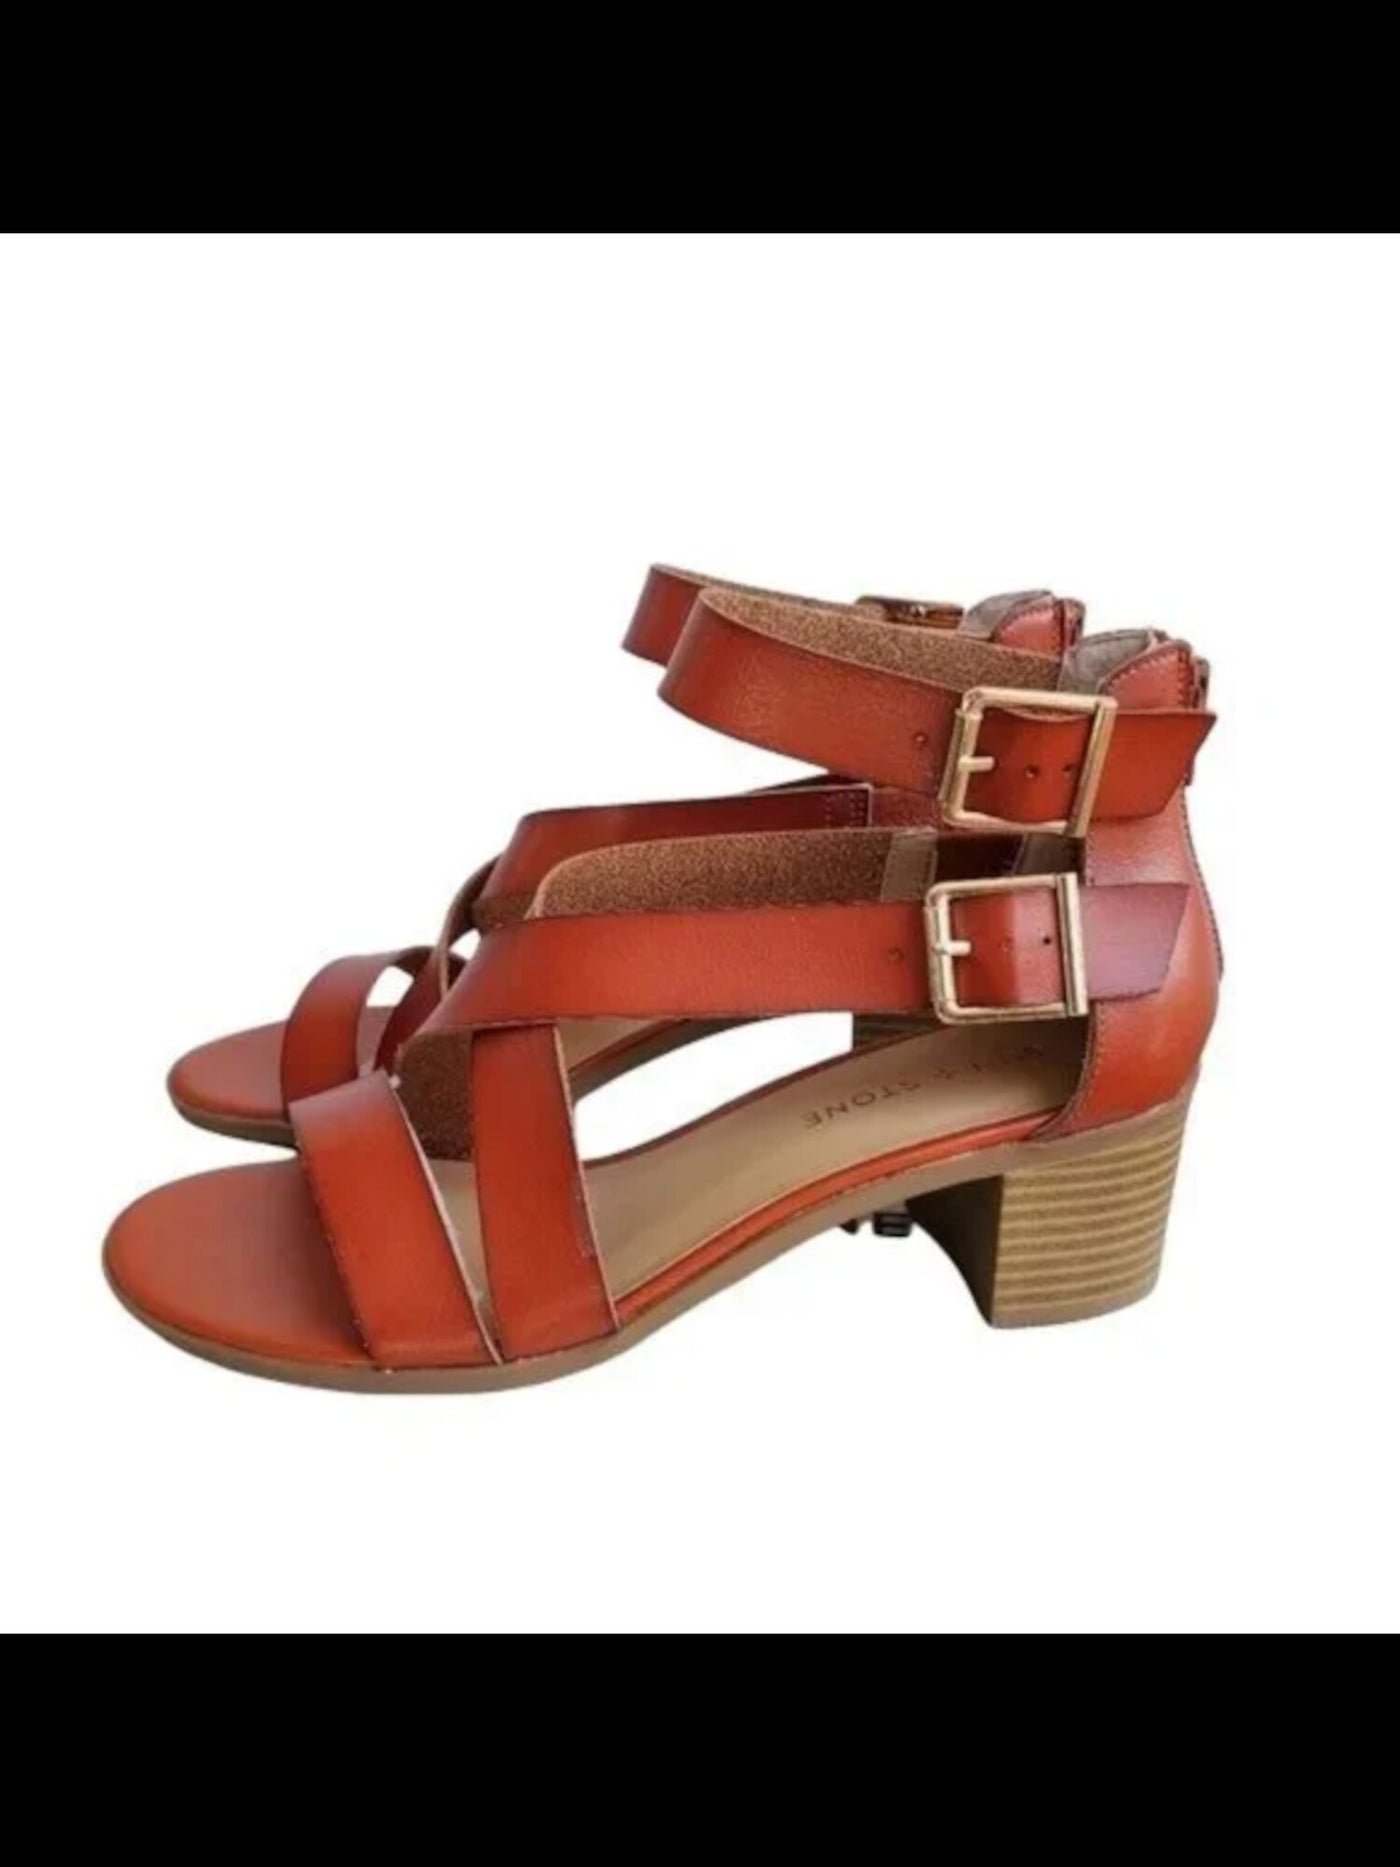 SUN STONE Womens Brown Strappy Open Toe Block Heel Buckle Sandals Shoes 5.5 M